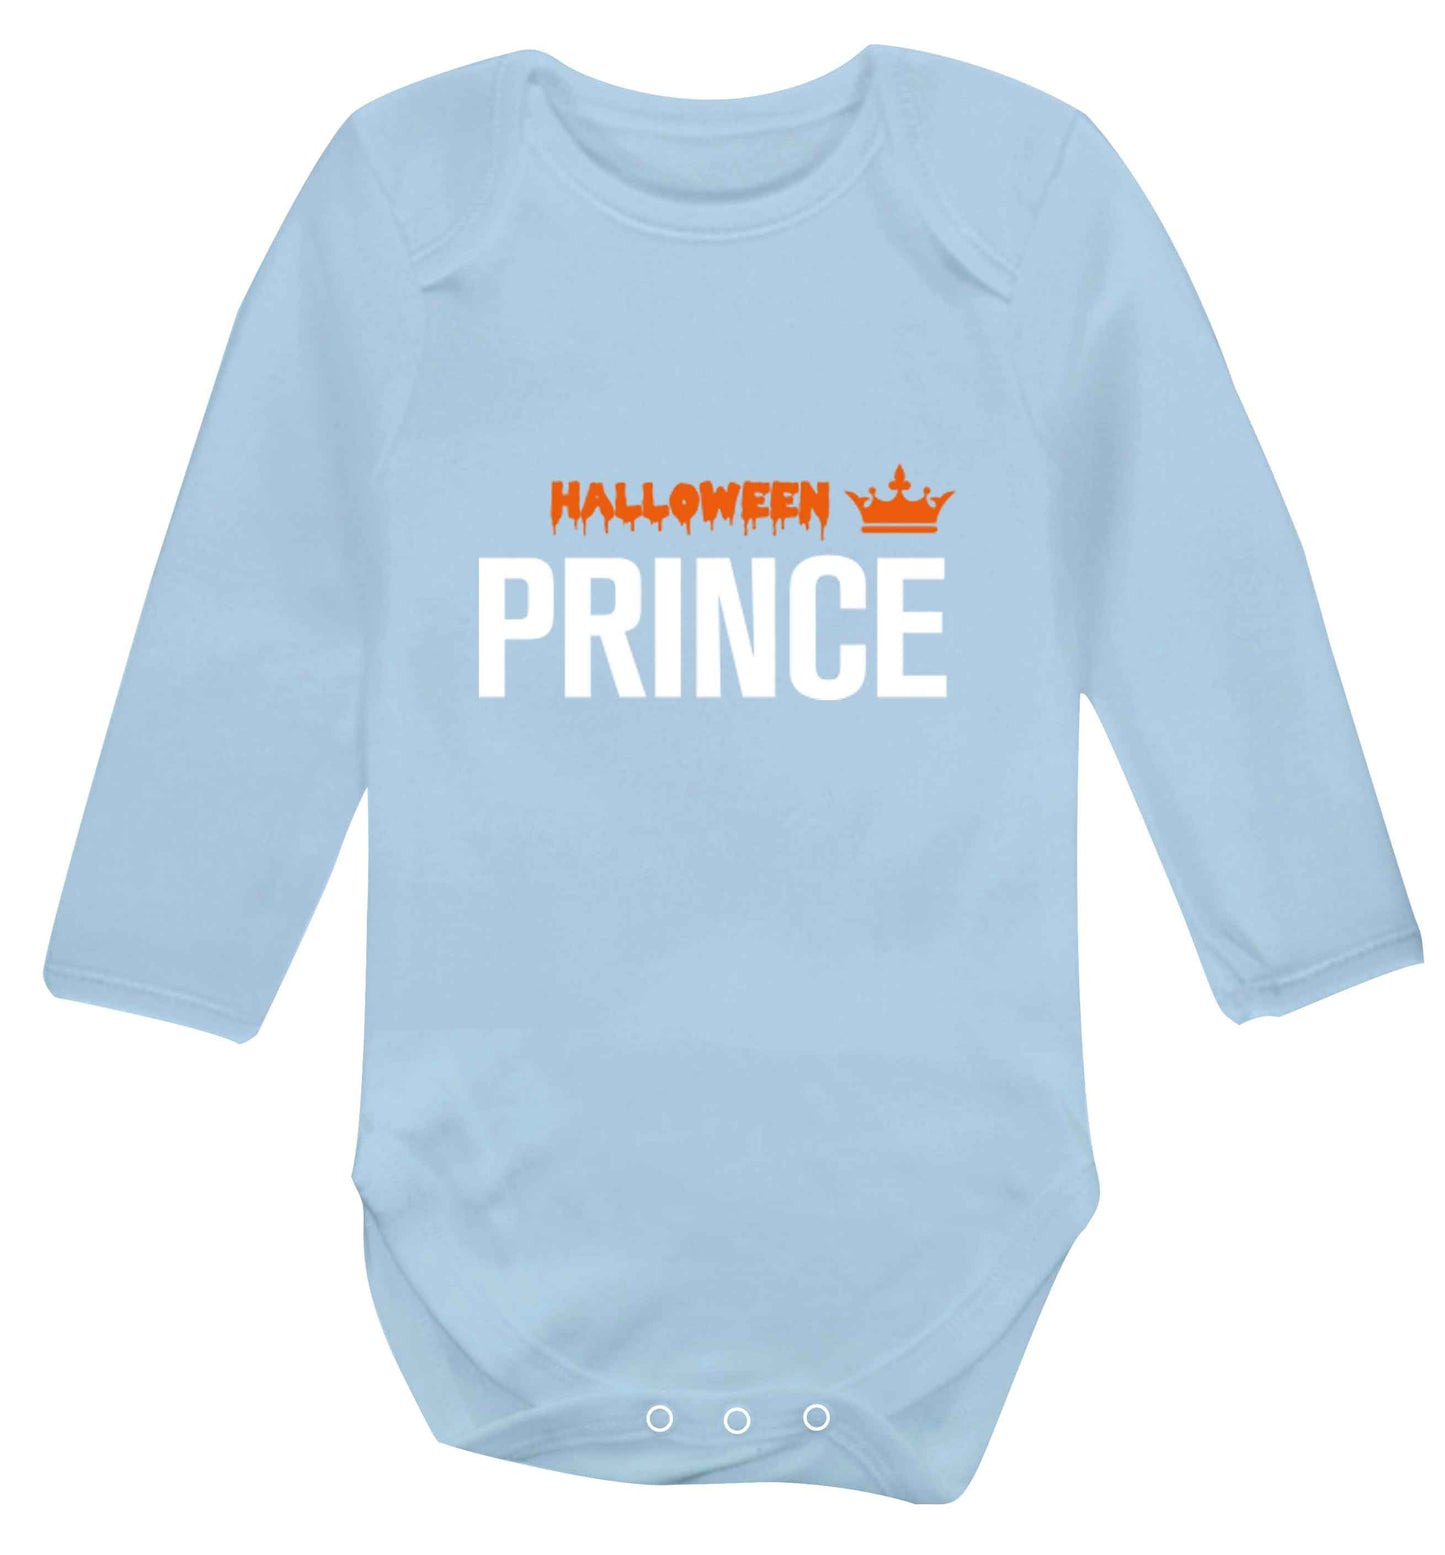 Halloween prince baby vest long sleeved pale blue 6-12 months